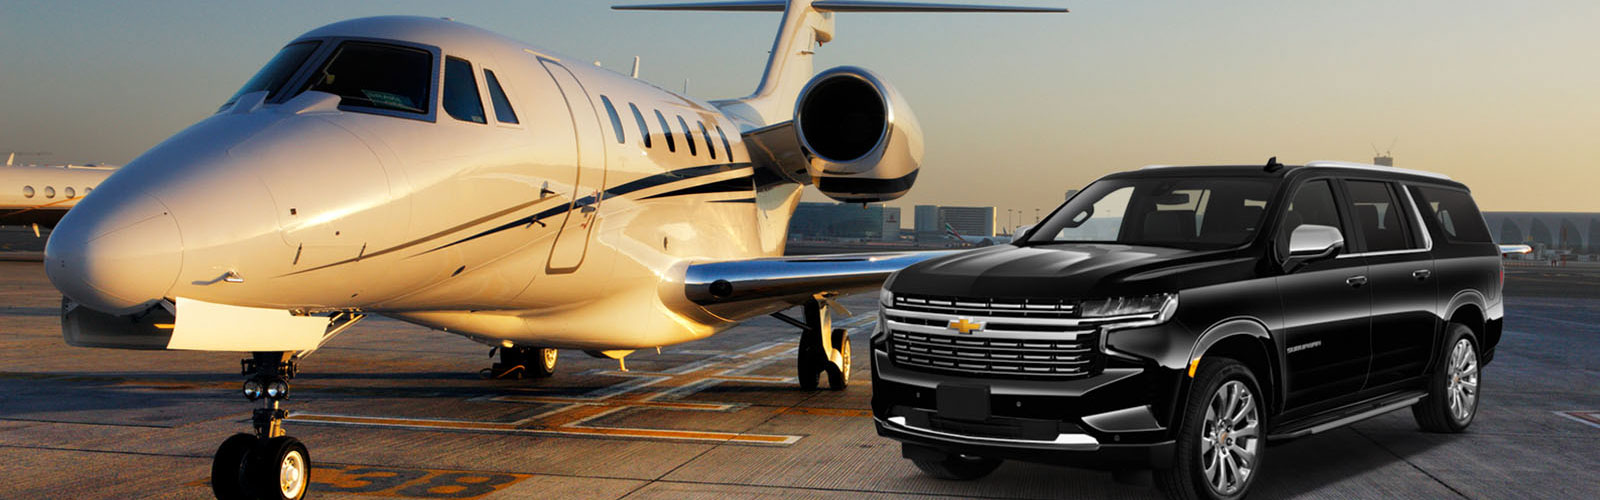 Airport Limo Service near me in Frisco TX